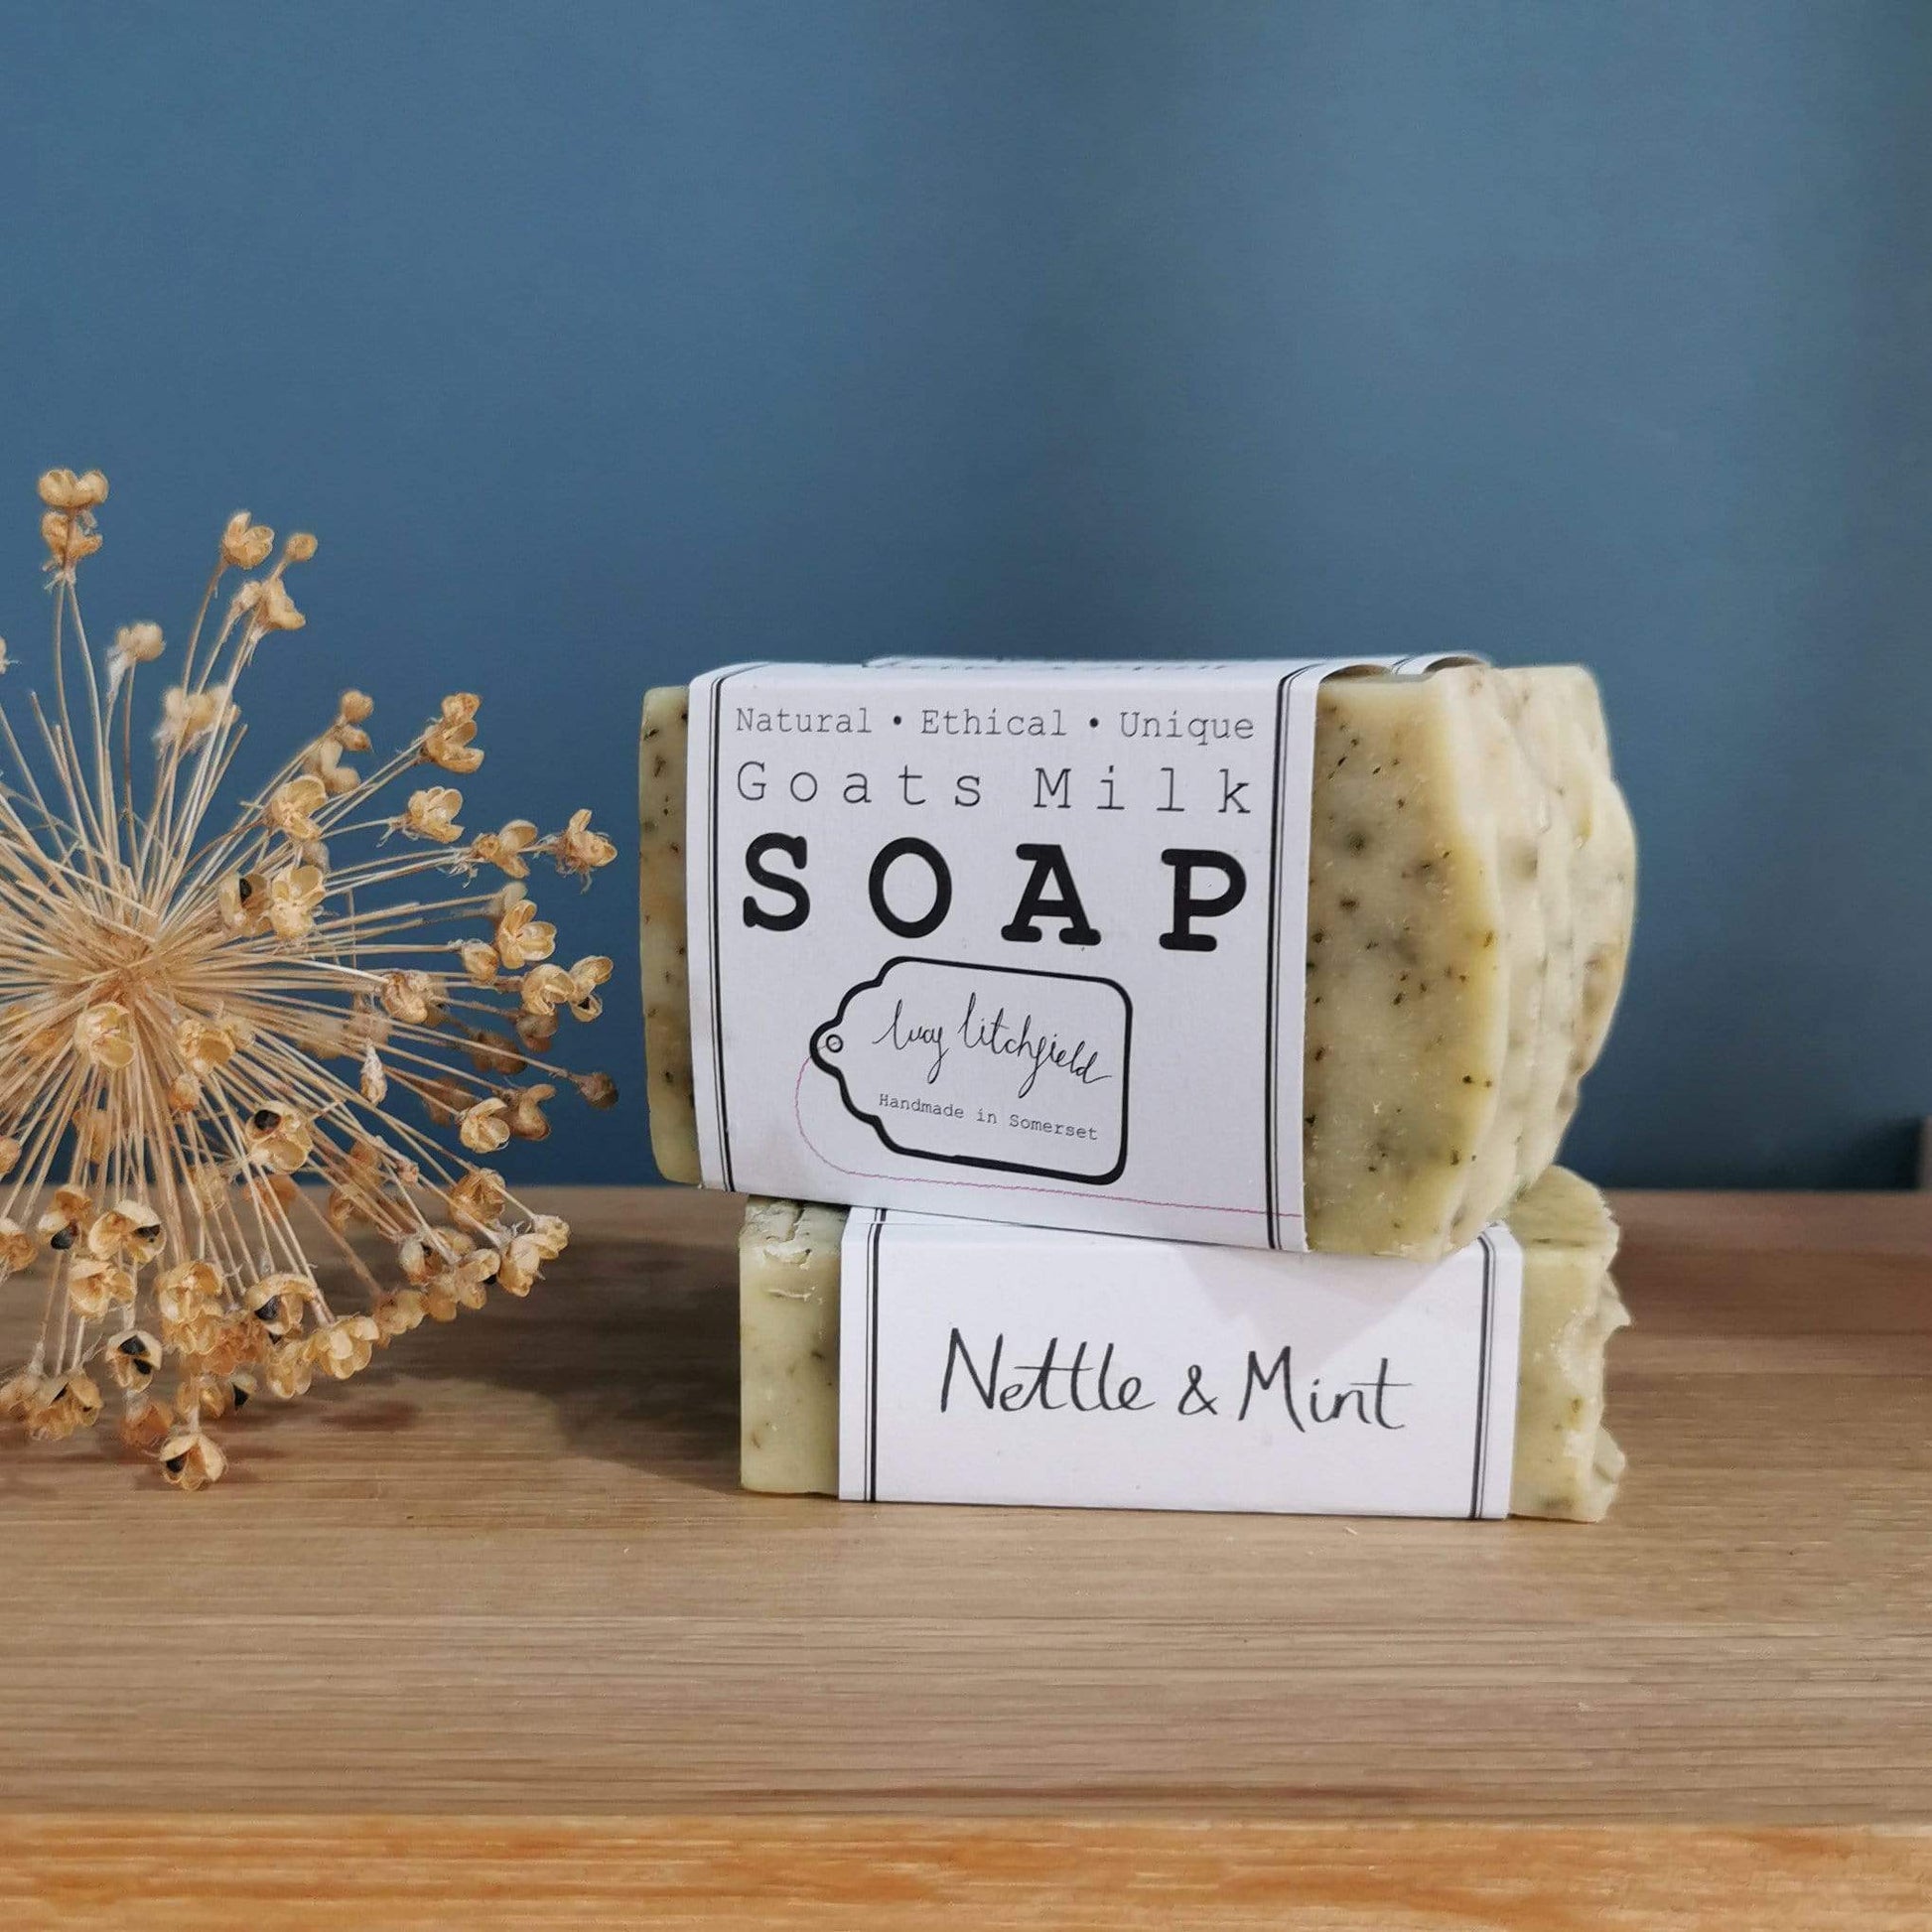 Lucy Litchfield Skin & Body Nettle and Mint Moisturising Soap (various)